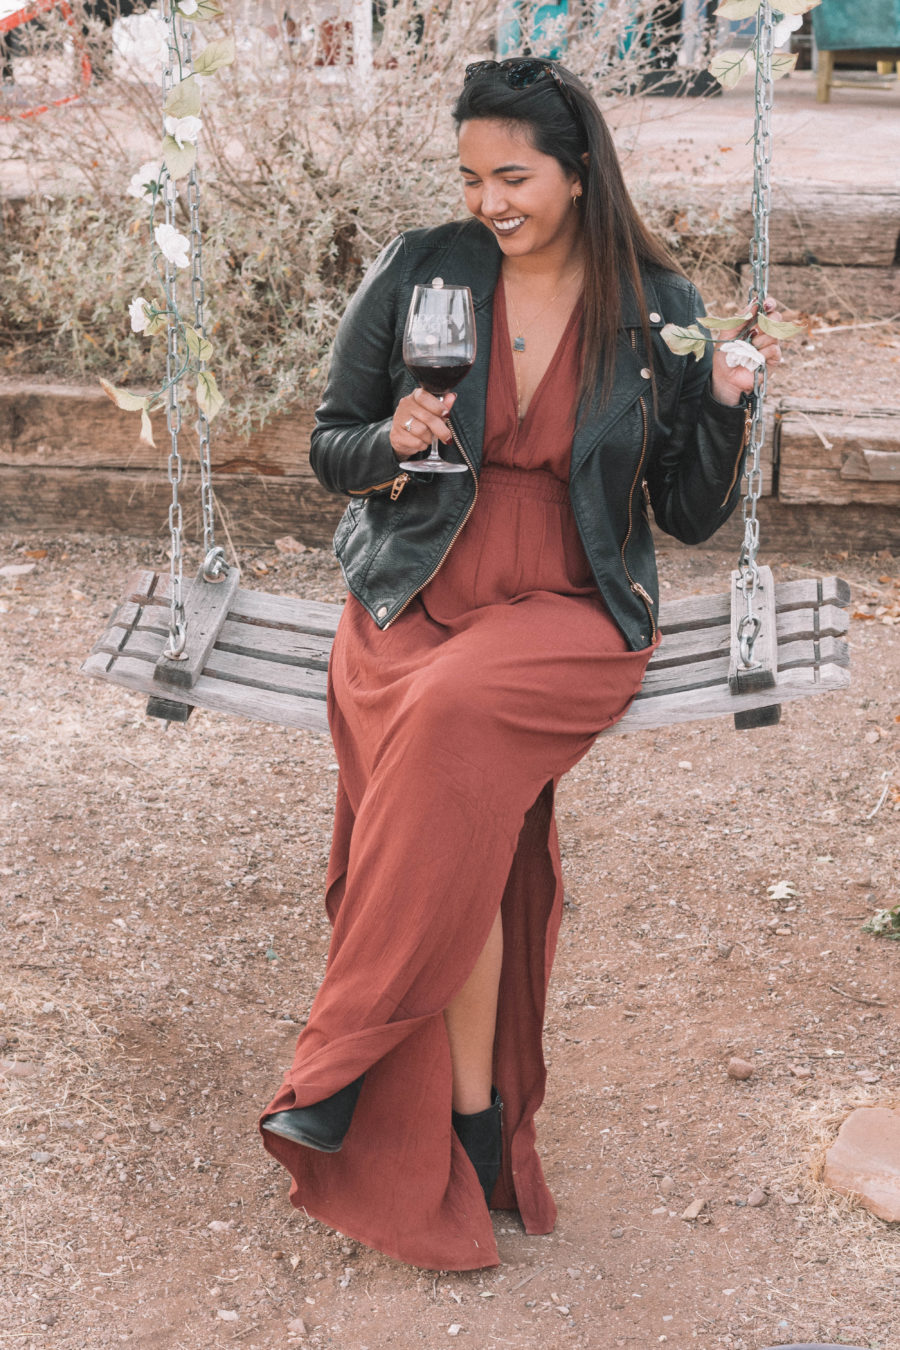 The perfect wine tasting outfit features a long dress and a moto jacket for some added edge!